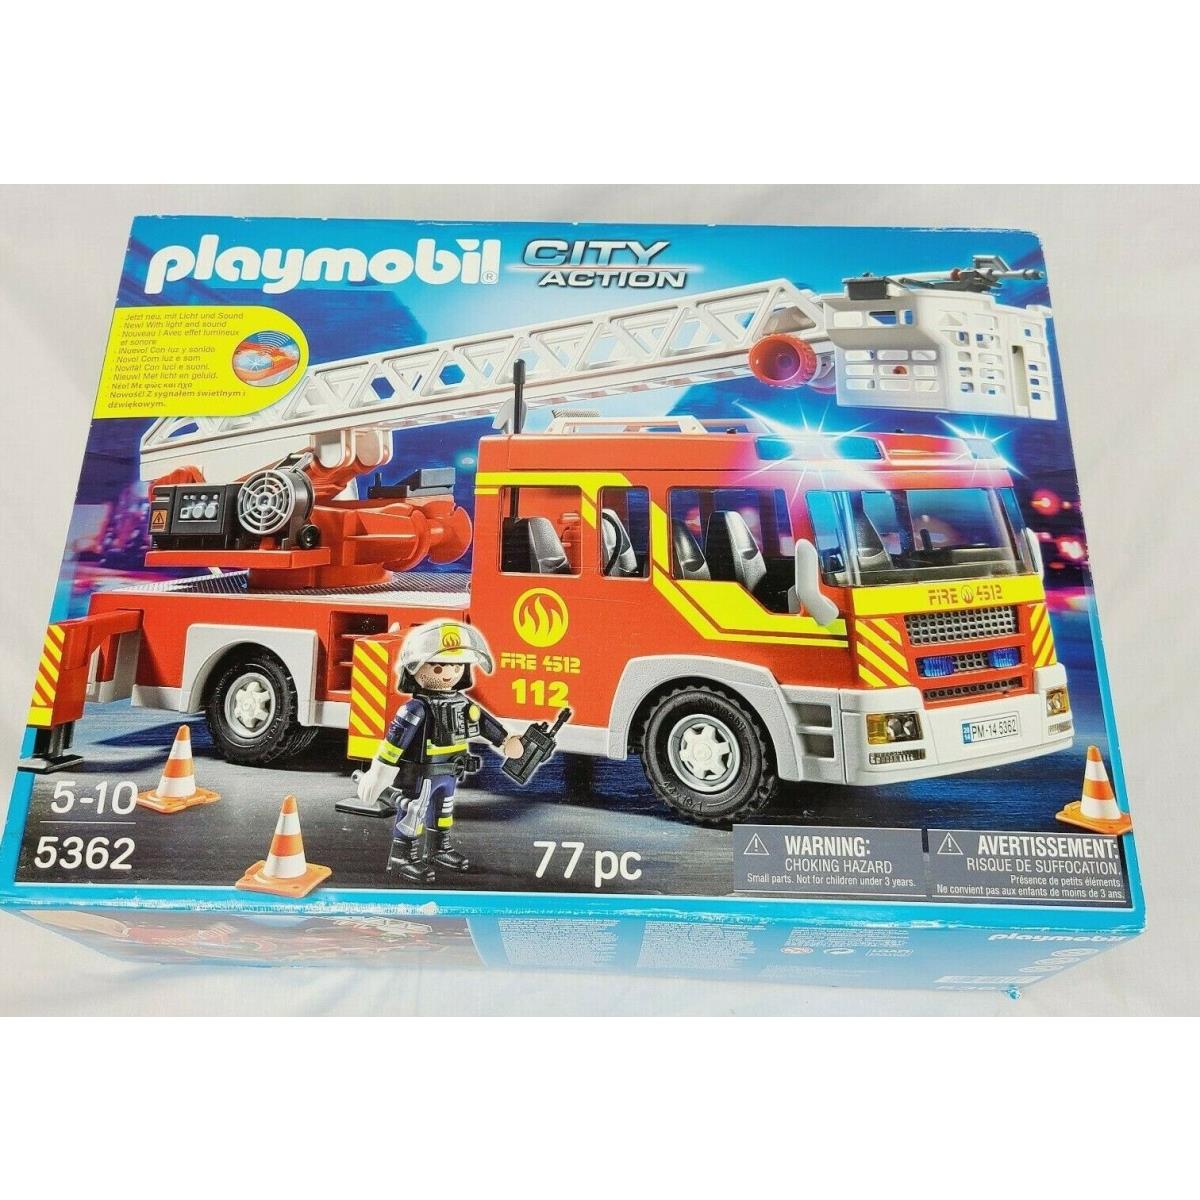 Playmobil 5362 City Action Fire Ladder Unit with Lights Sound